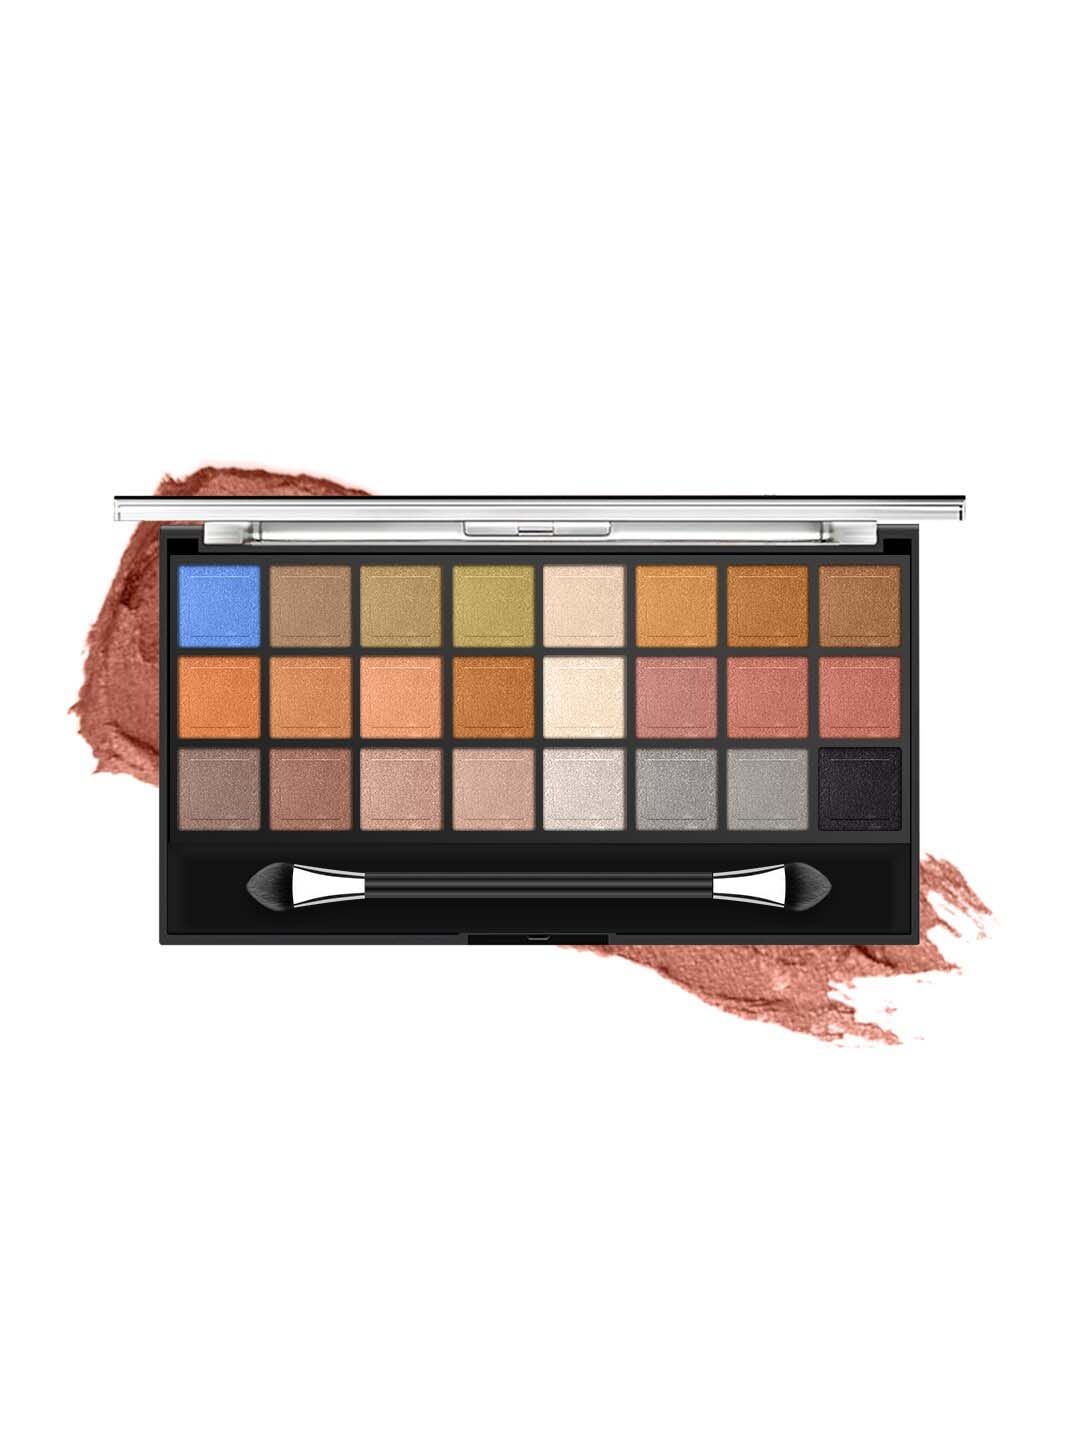 MISS ROSE 24 Color Matte Eyeshadow Palette Price in India